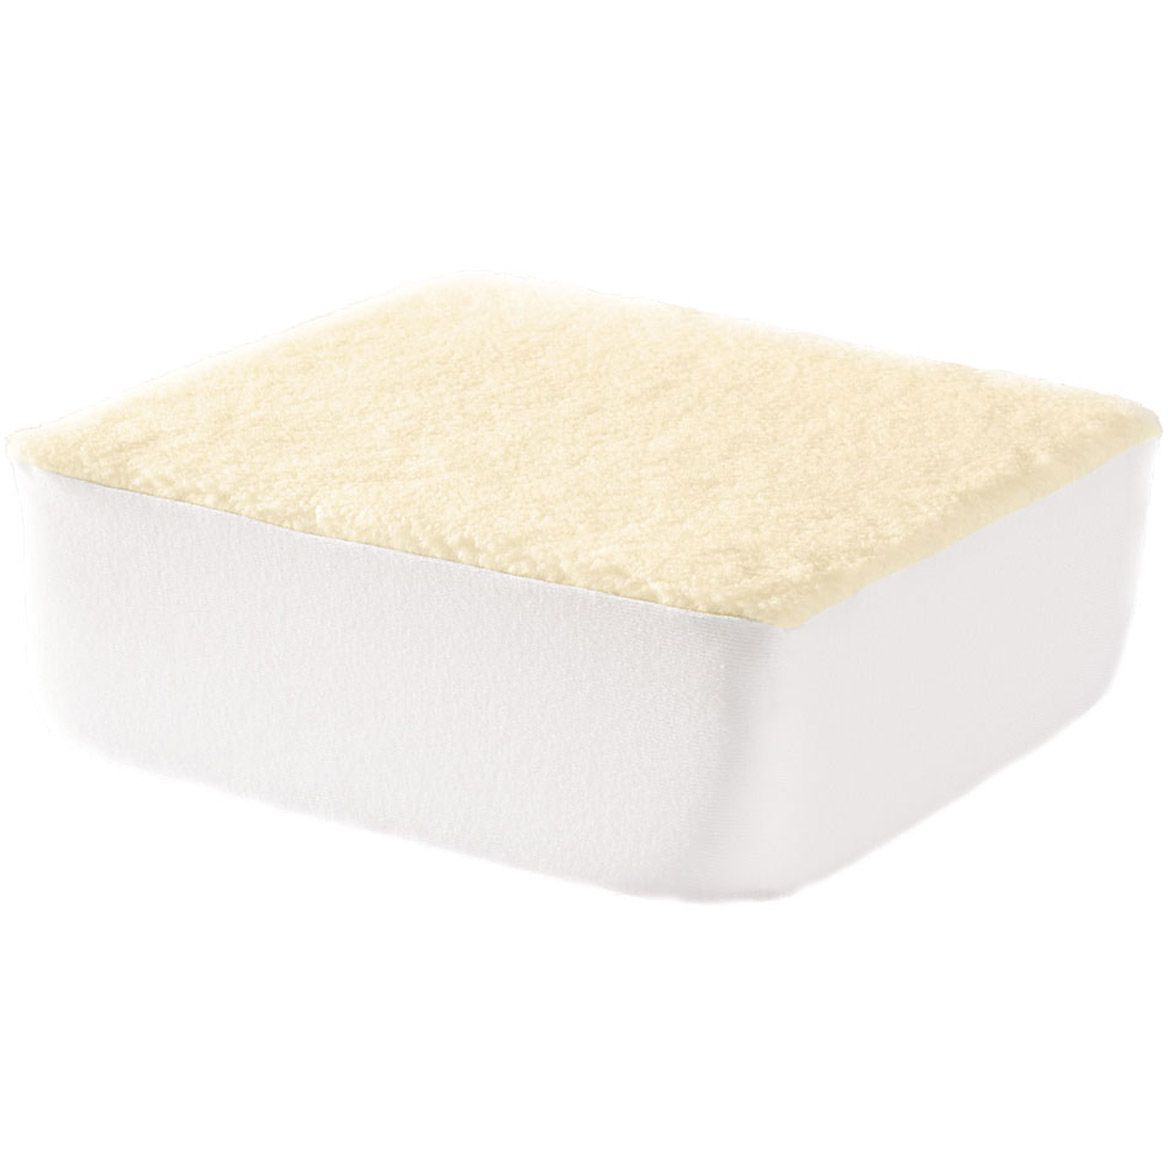 Extra Thick Foam Cushion - Large by LivingSURE™ + '-' + 336665